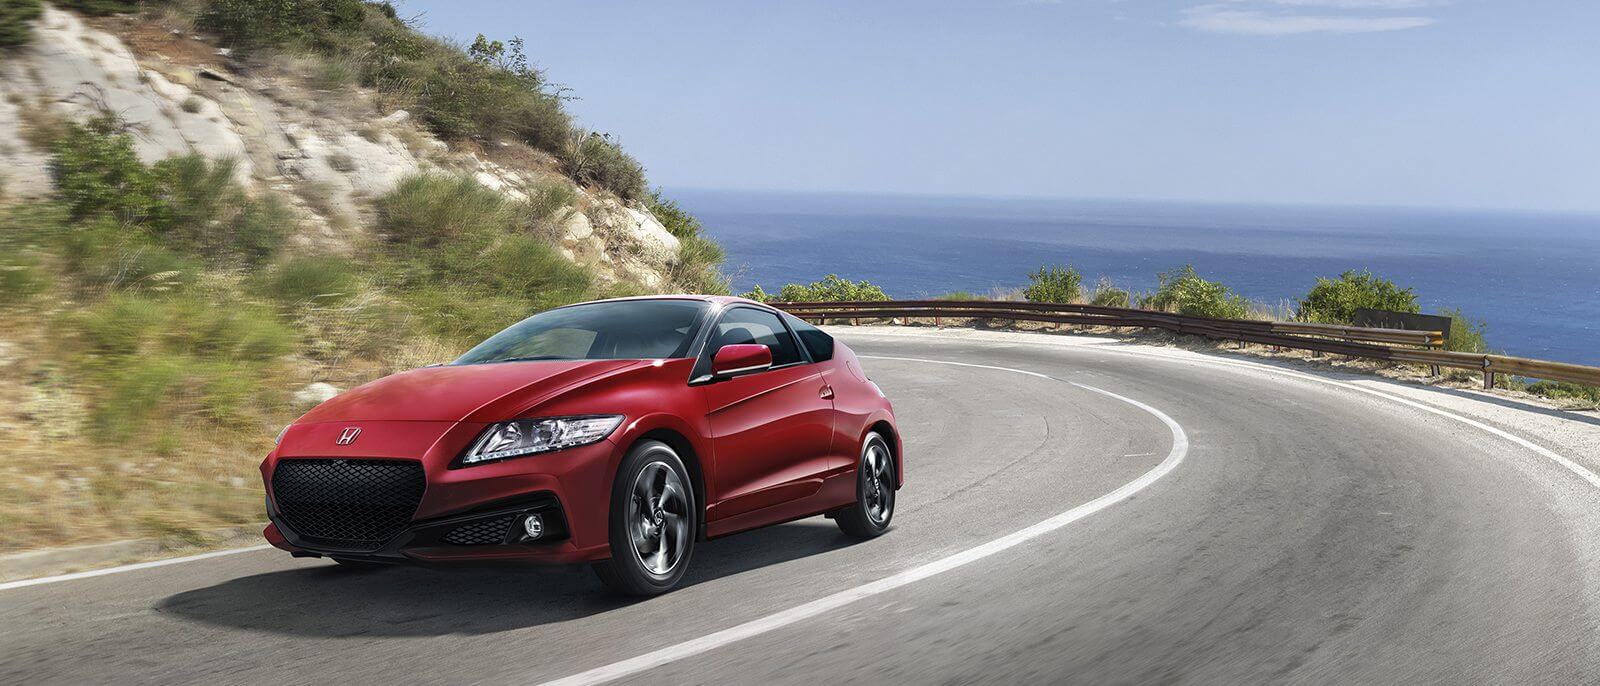 Luxury Meets Power in the New 2016 Honda CR-Z